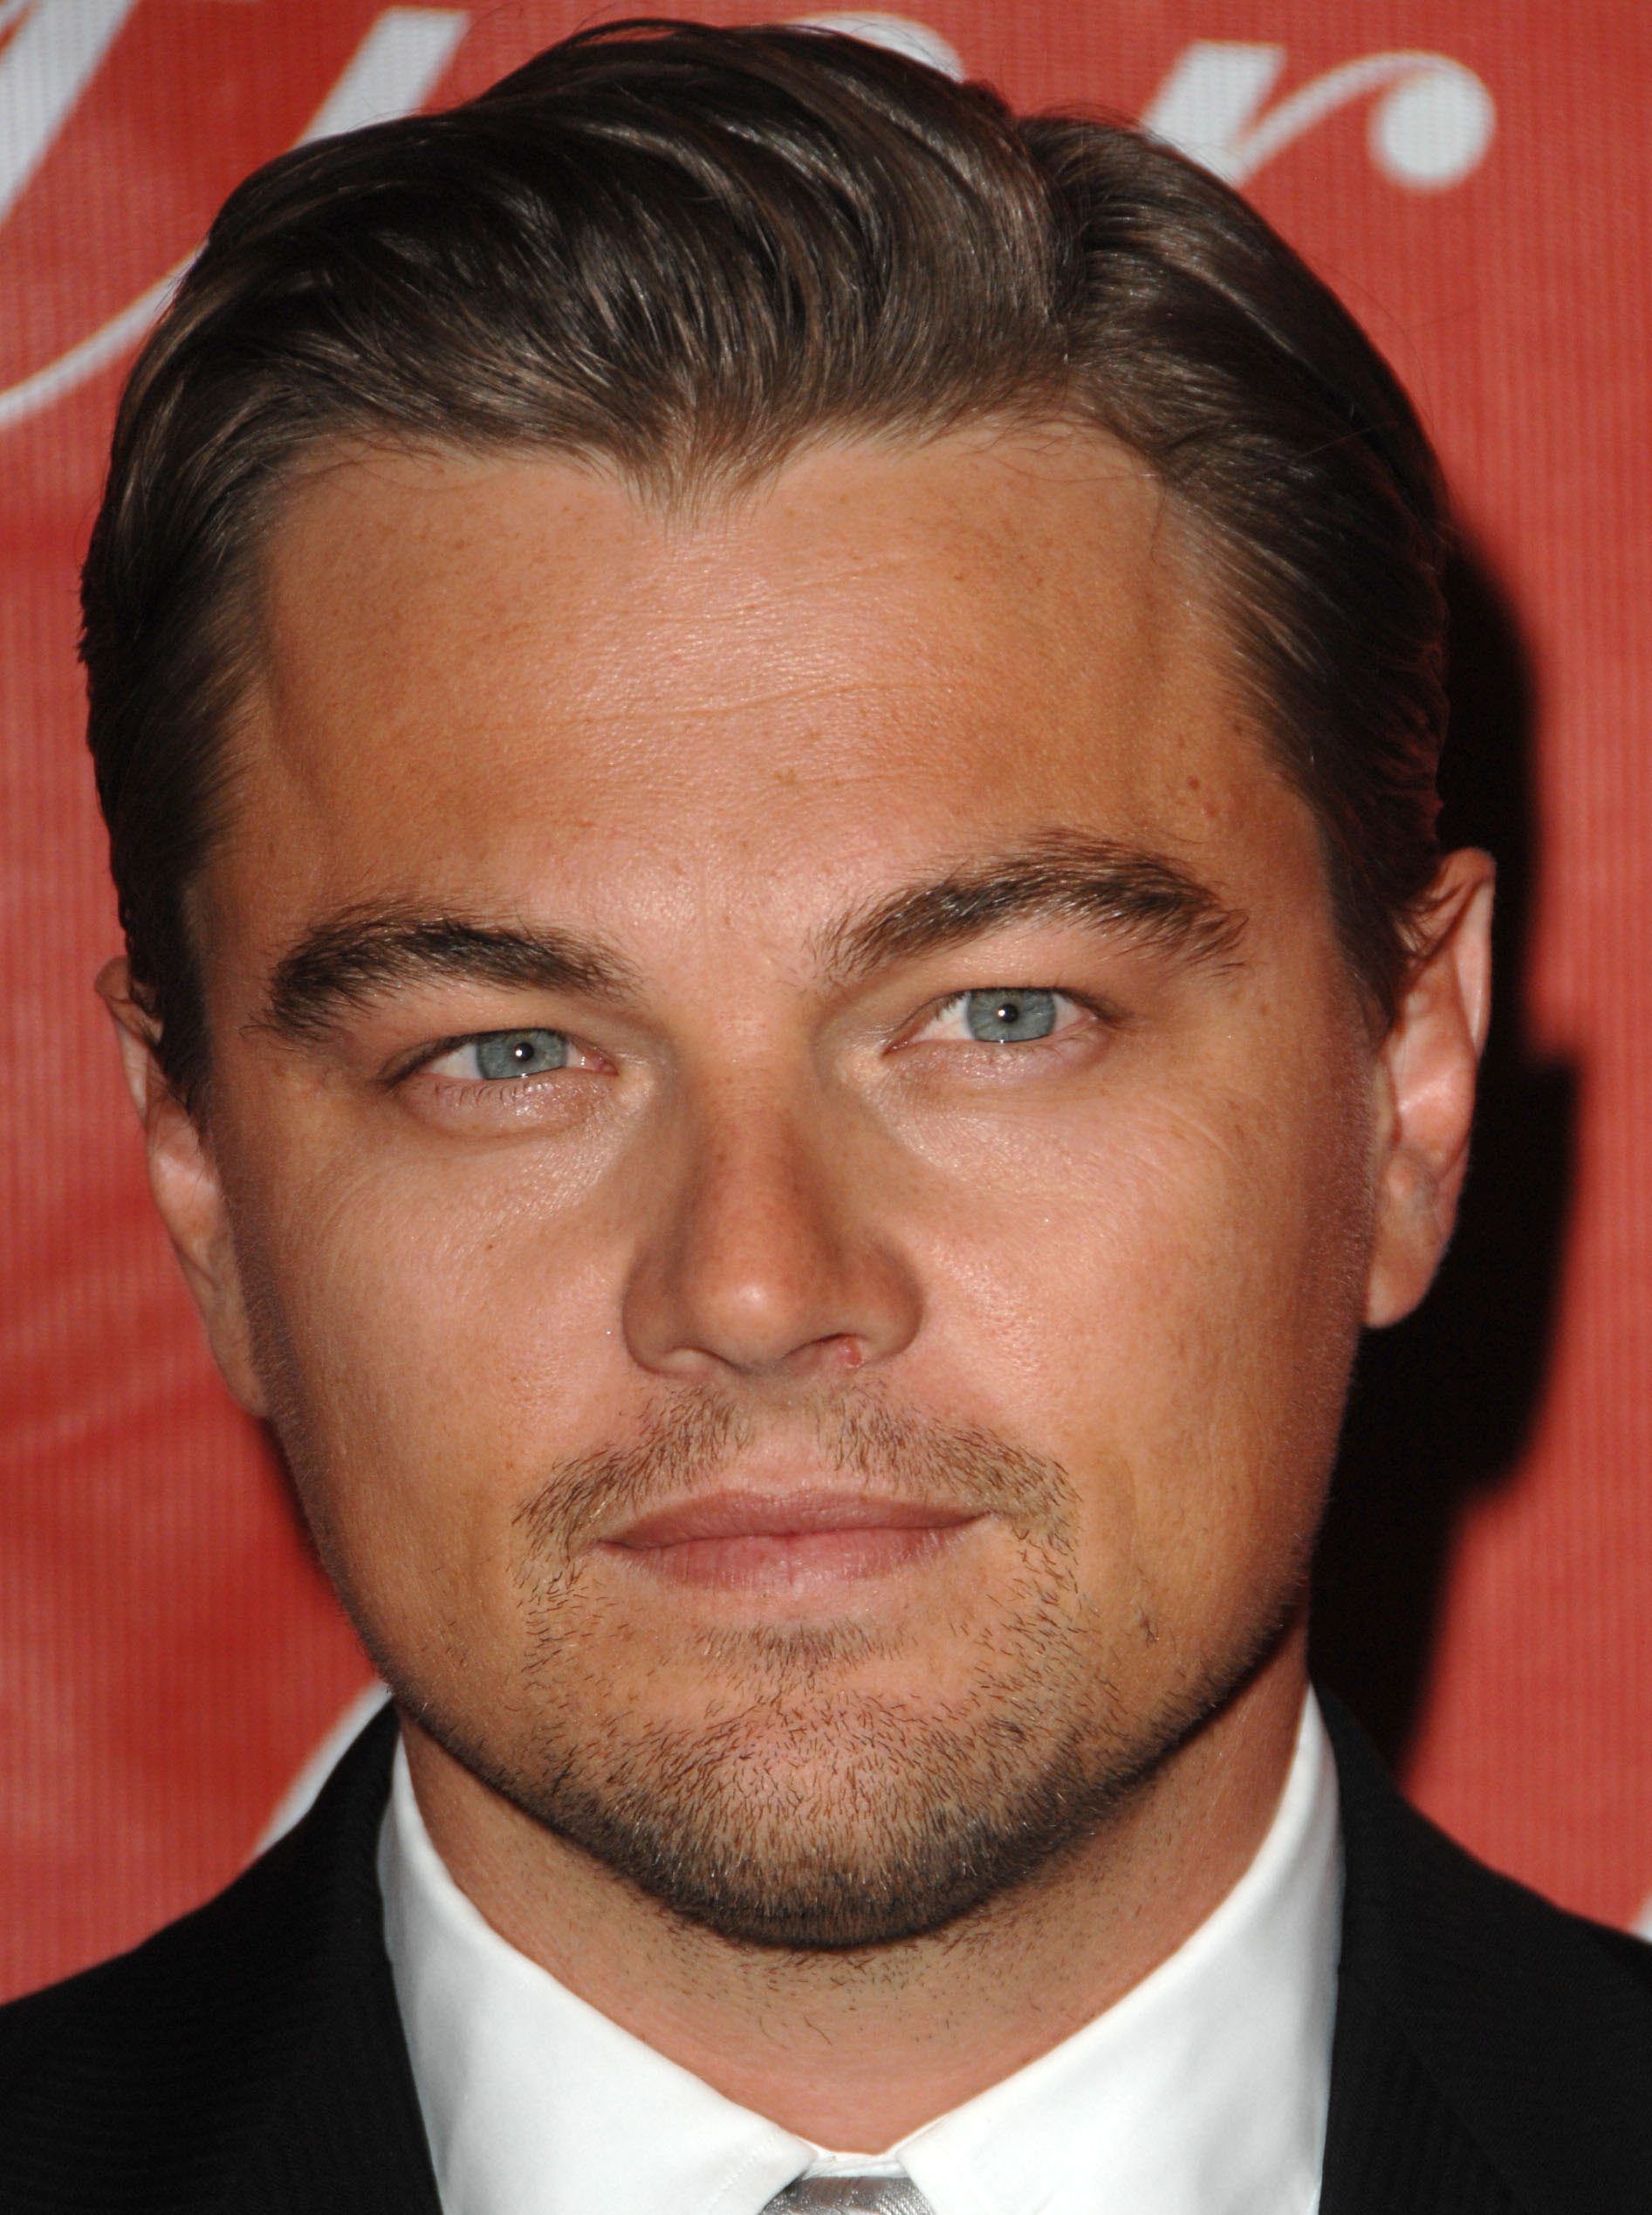 Leonardo DiCaprio attends the Palm Springs Film Festival Gala on January 6, 2009 in Palm Springs, California | Source: Getty Images